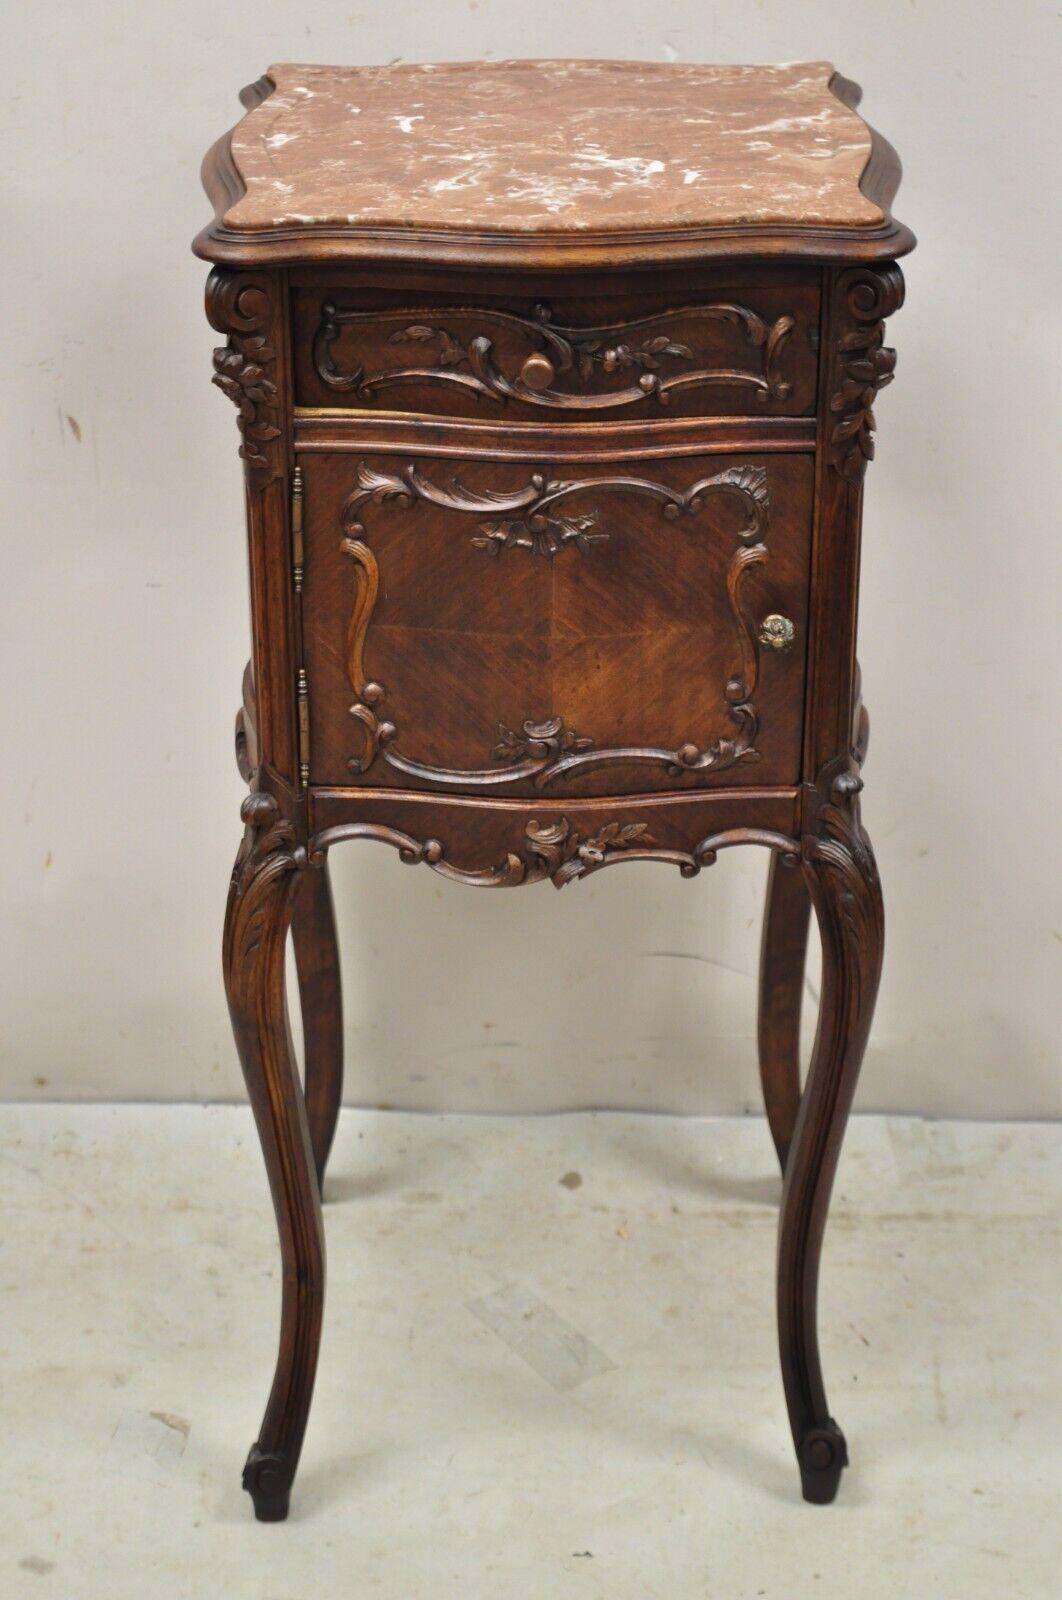 Antique French Louis XV Style Carved Walnut Marble Top Porcelain Lined Washstand Nightstand. Item features a porcelain lined interior, inset pink rouge marble top, nicely carved details, 1 swing door, 1 dovetailed drawer, carved ball and claw feet,